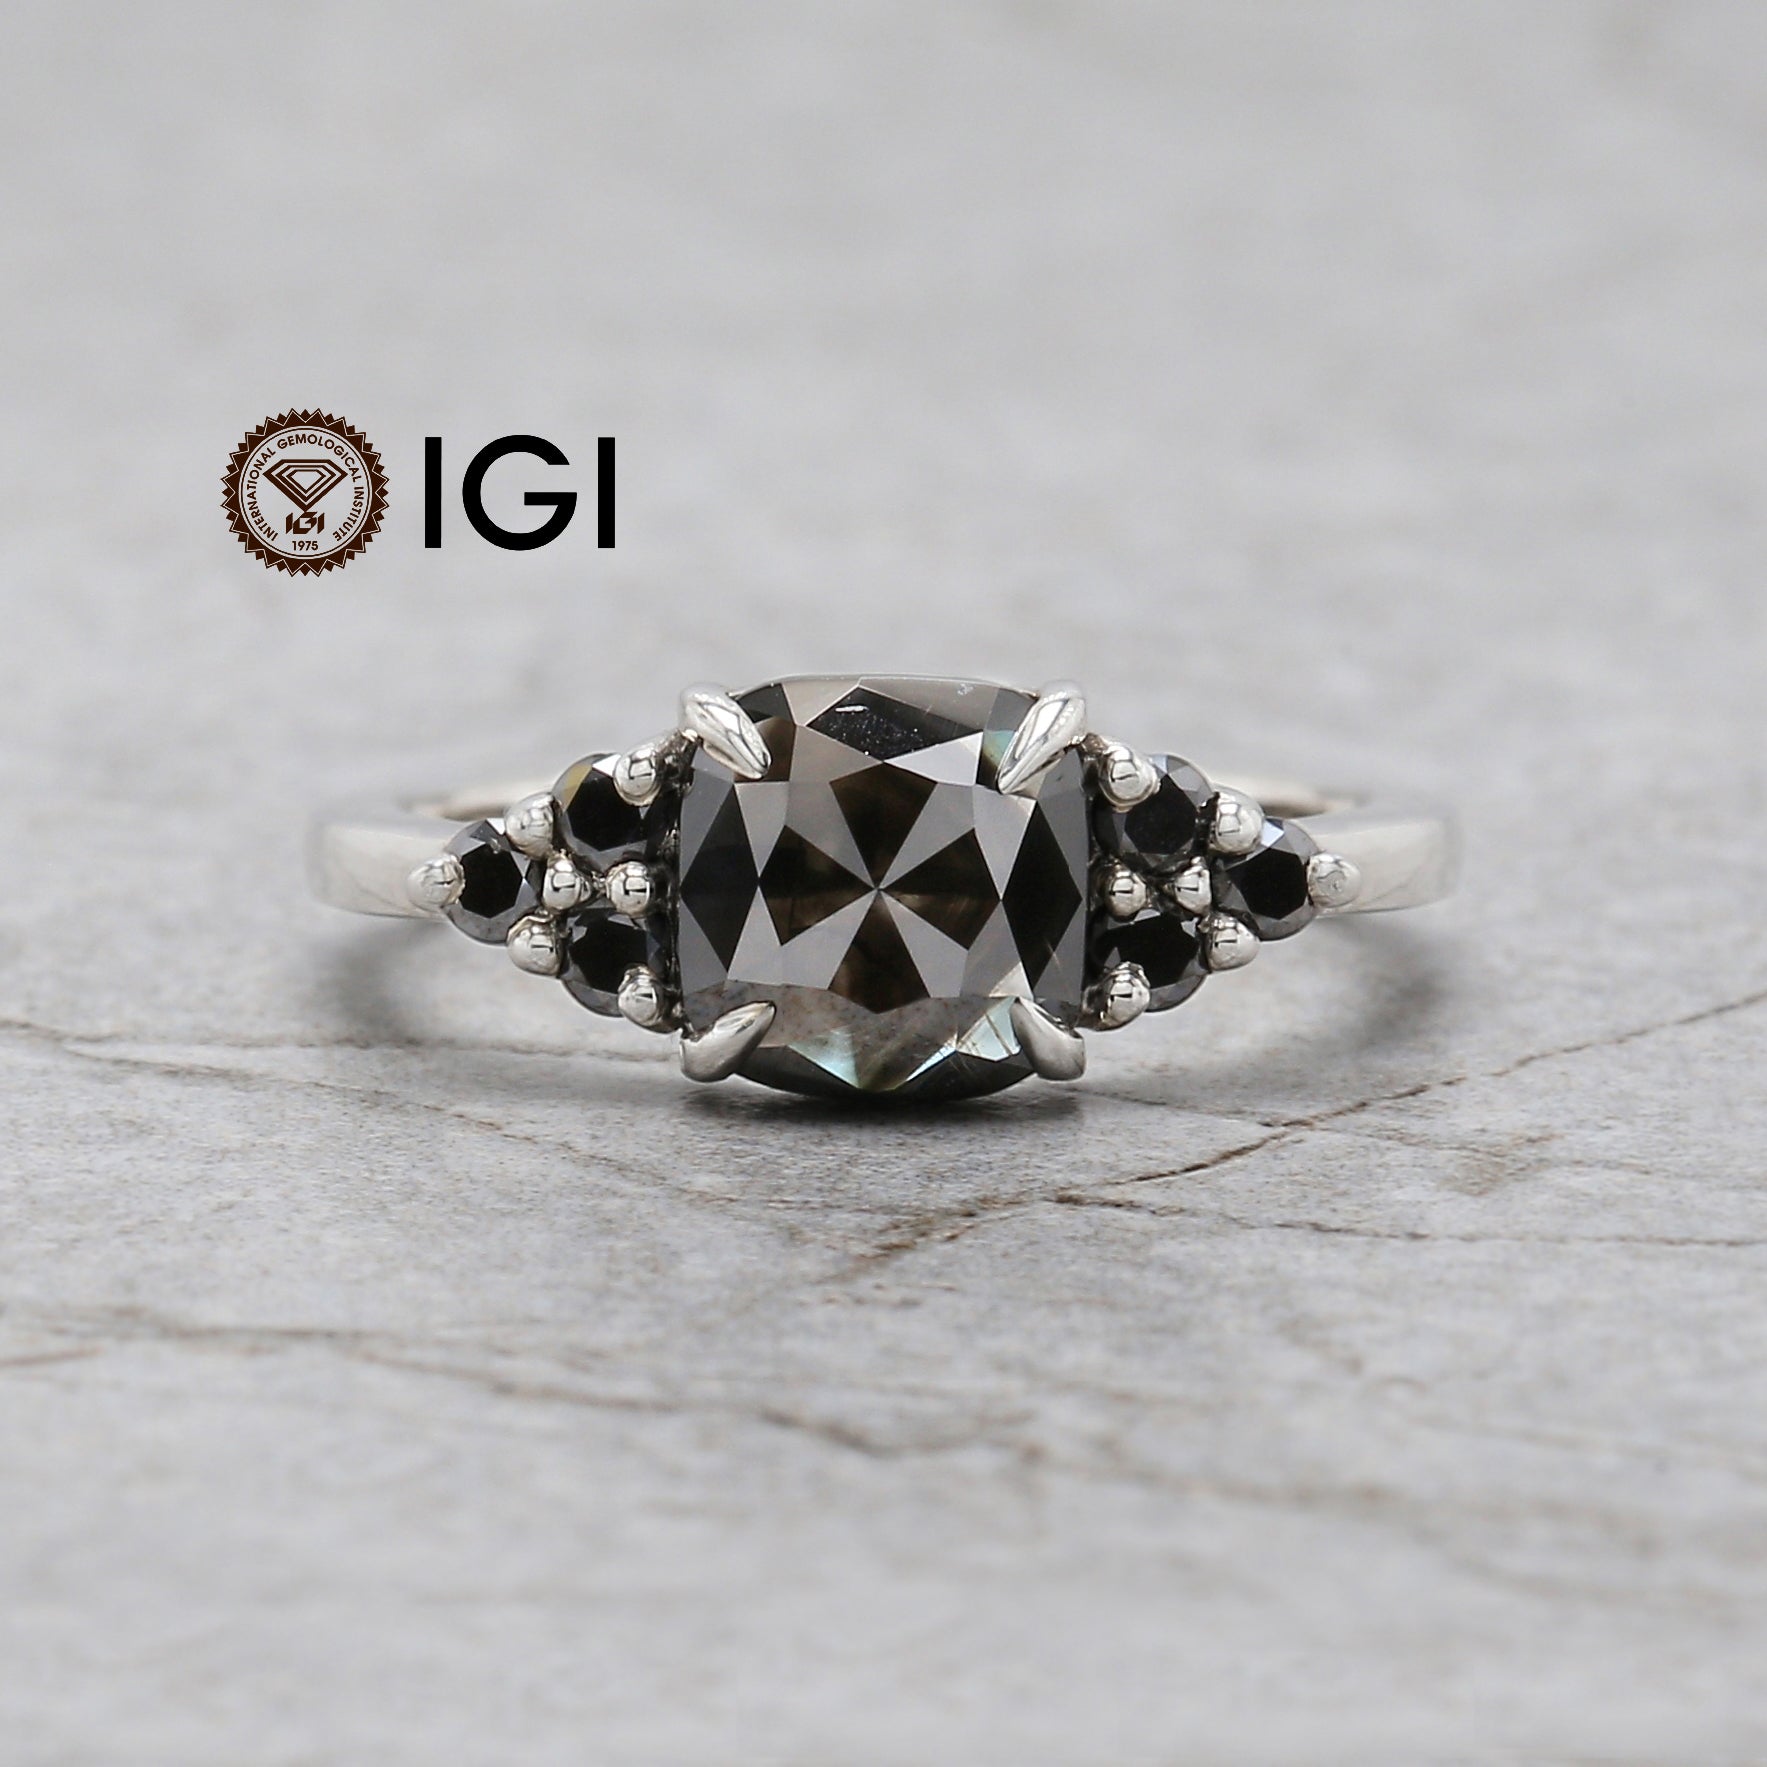 IGI Certified Cushion Black Color Diamond Ring 1.54 Ct 7.15 MM Cushion Diamond Ring 14K Solid White Gold Silver Engagement Ring Gift For Her QL9398